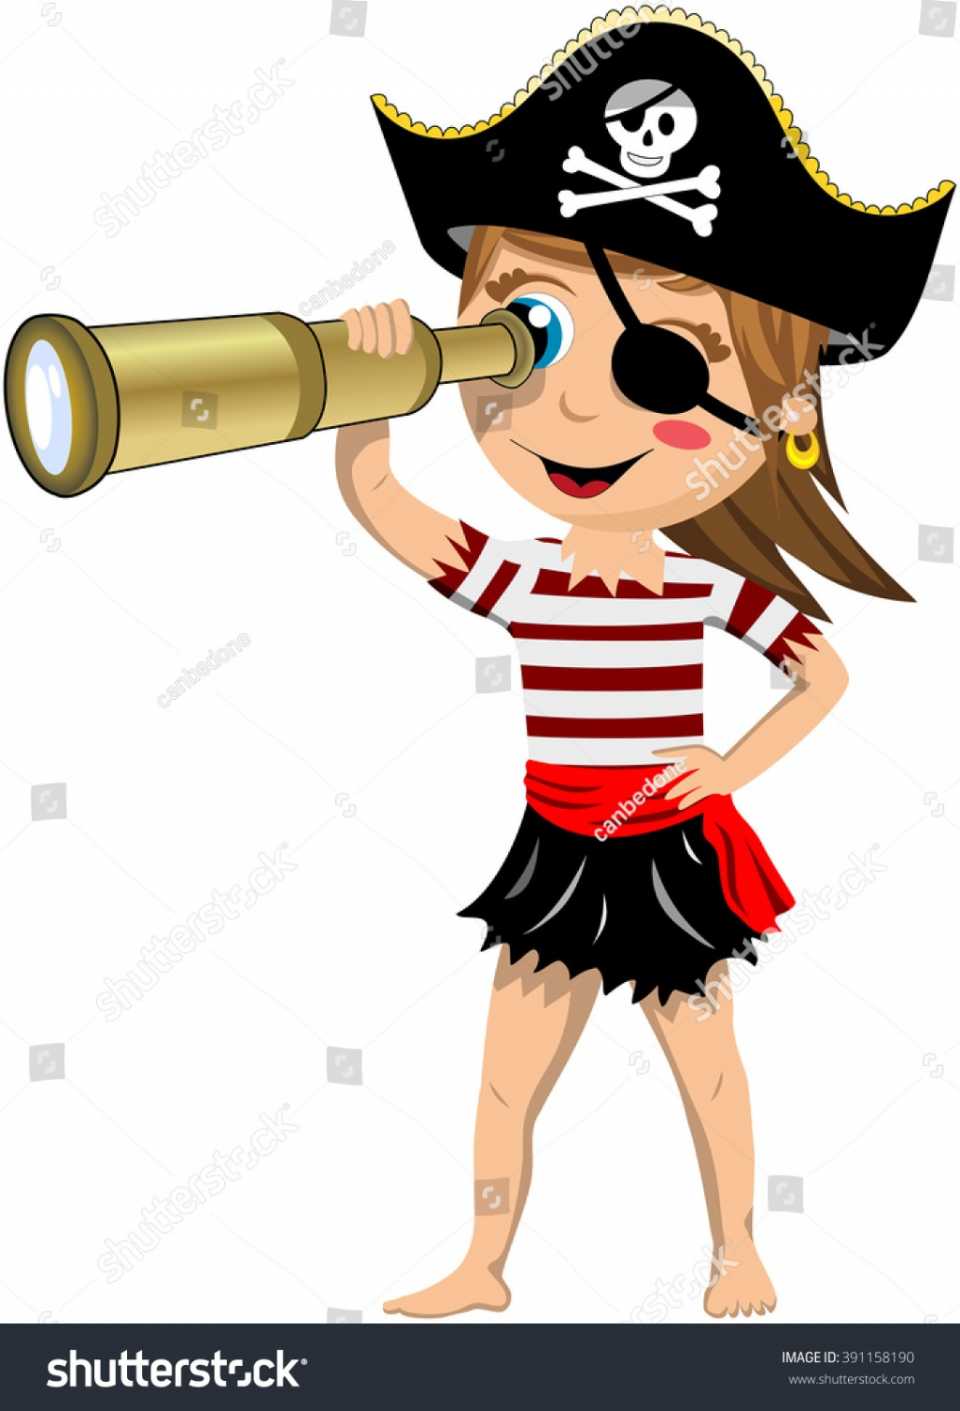 stock-vector-cartoon-pirate-girl-barefoot-with-eye-patch-observing-the-horizon-w.jpg